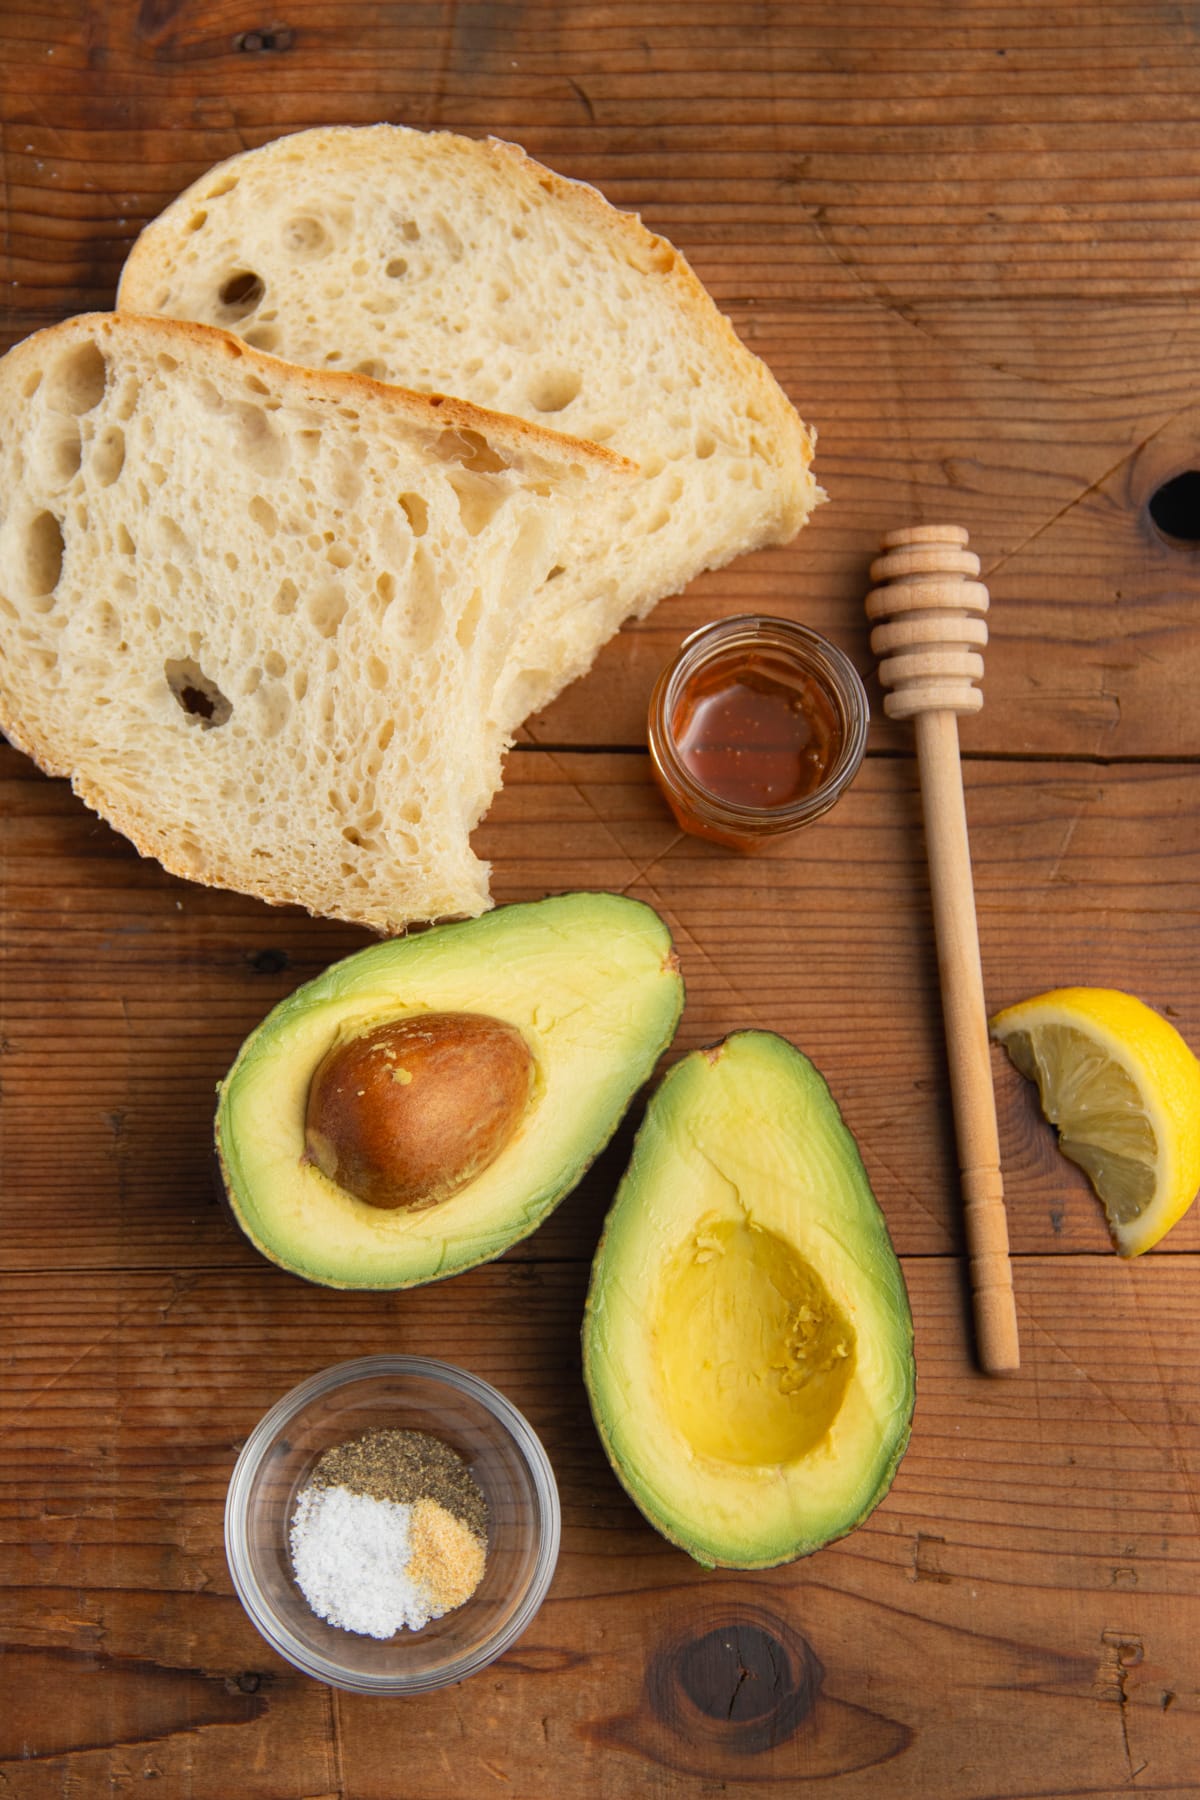 This is a picture of the ingredients used to make avocado toast with honey.